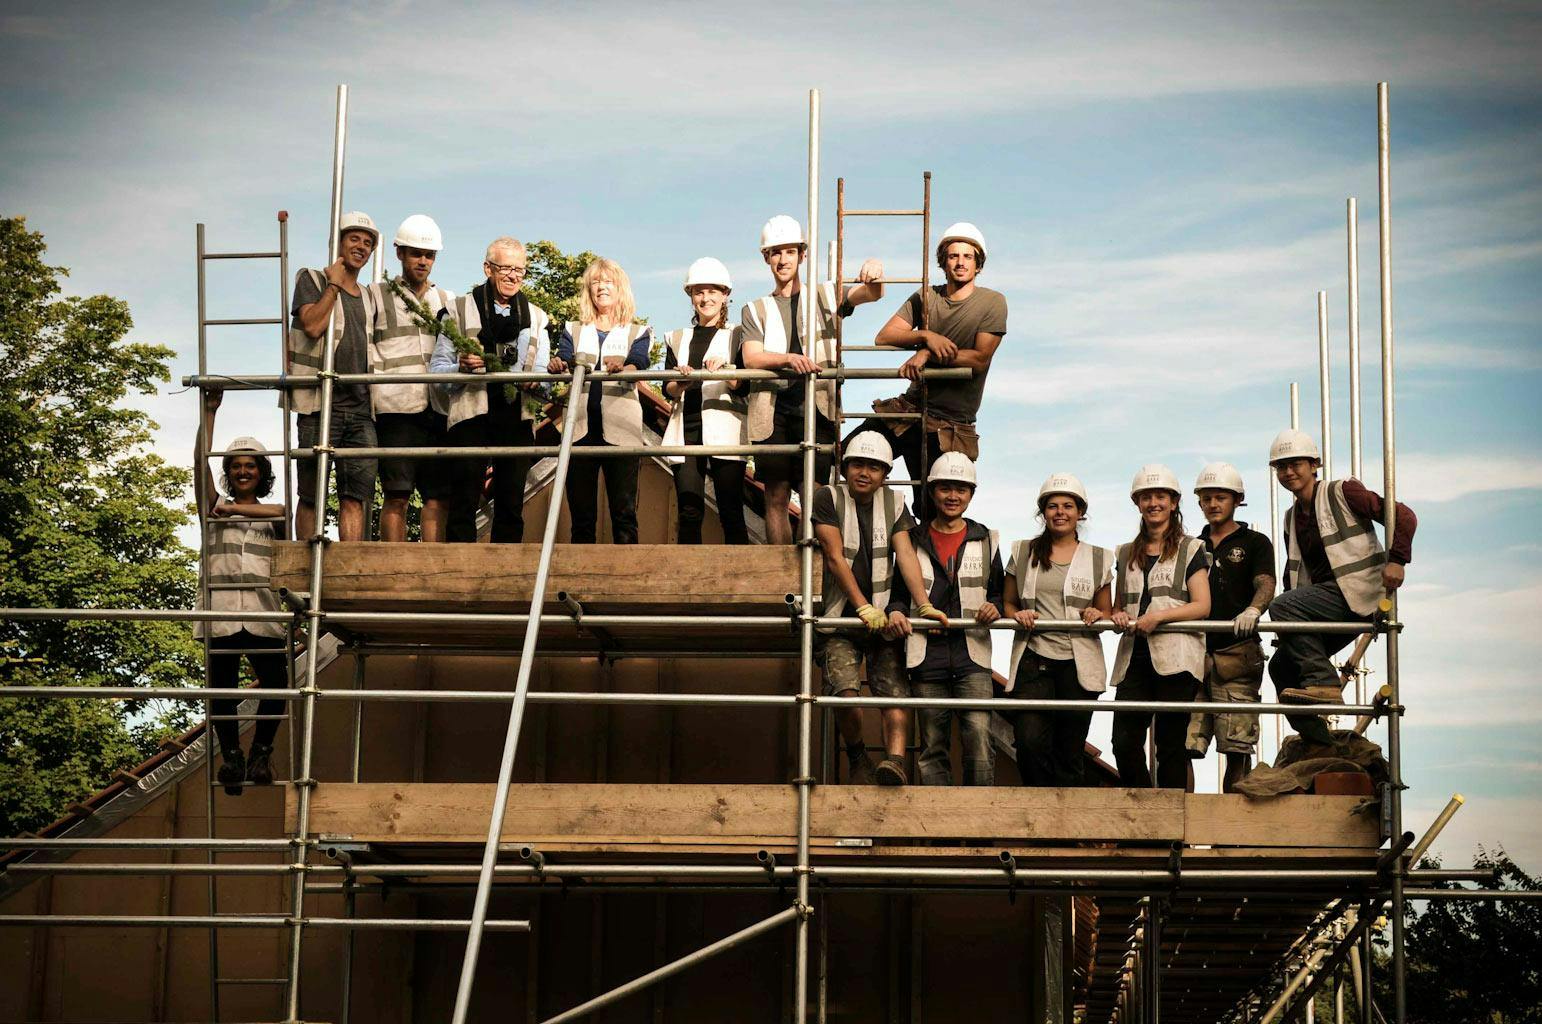 Image of students posing on building scaffolding